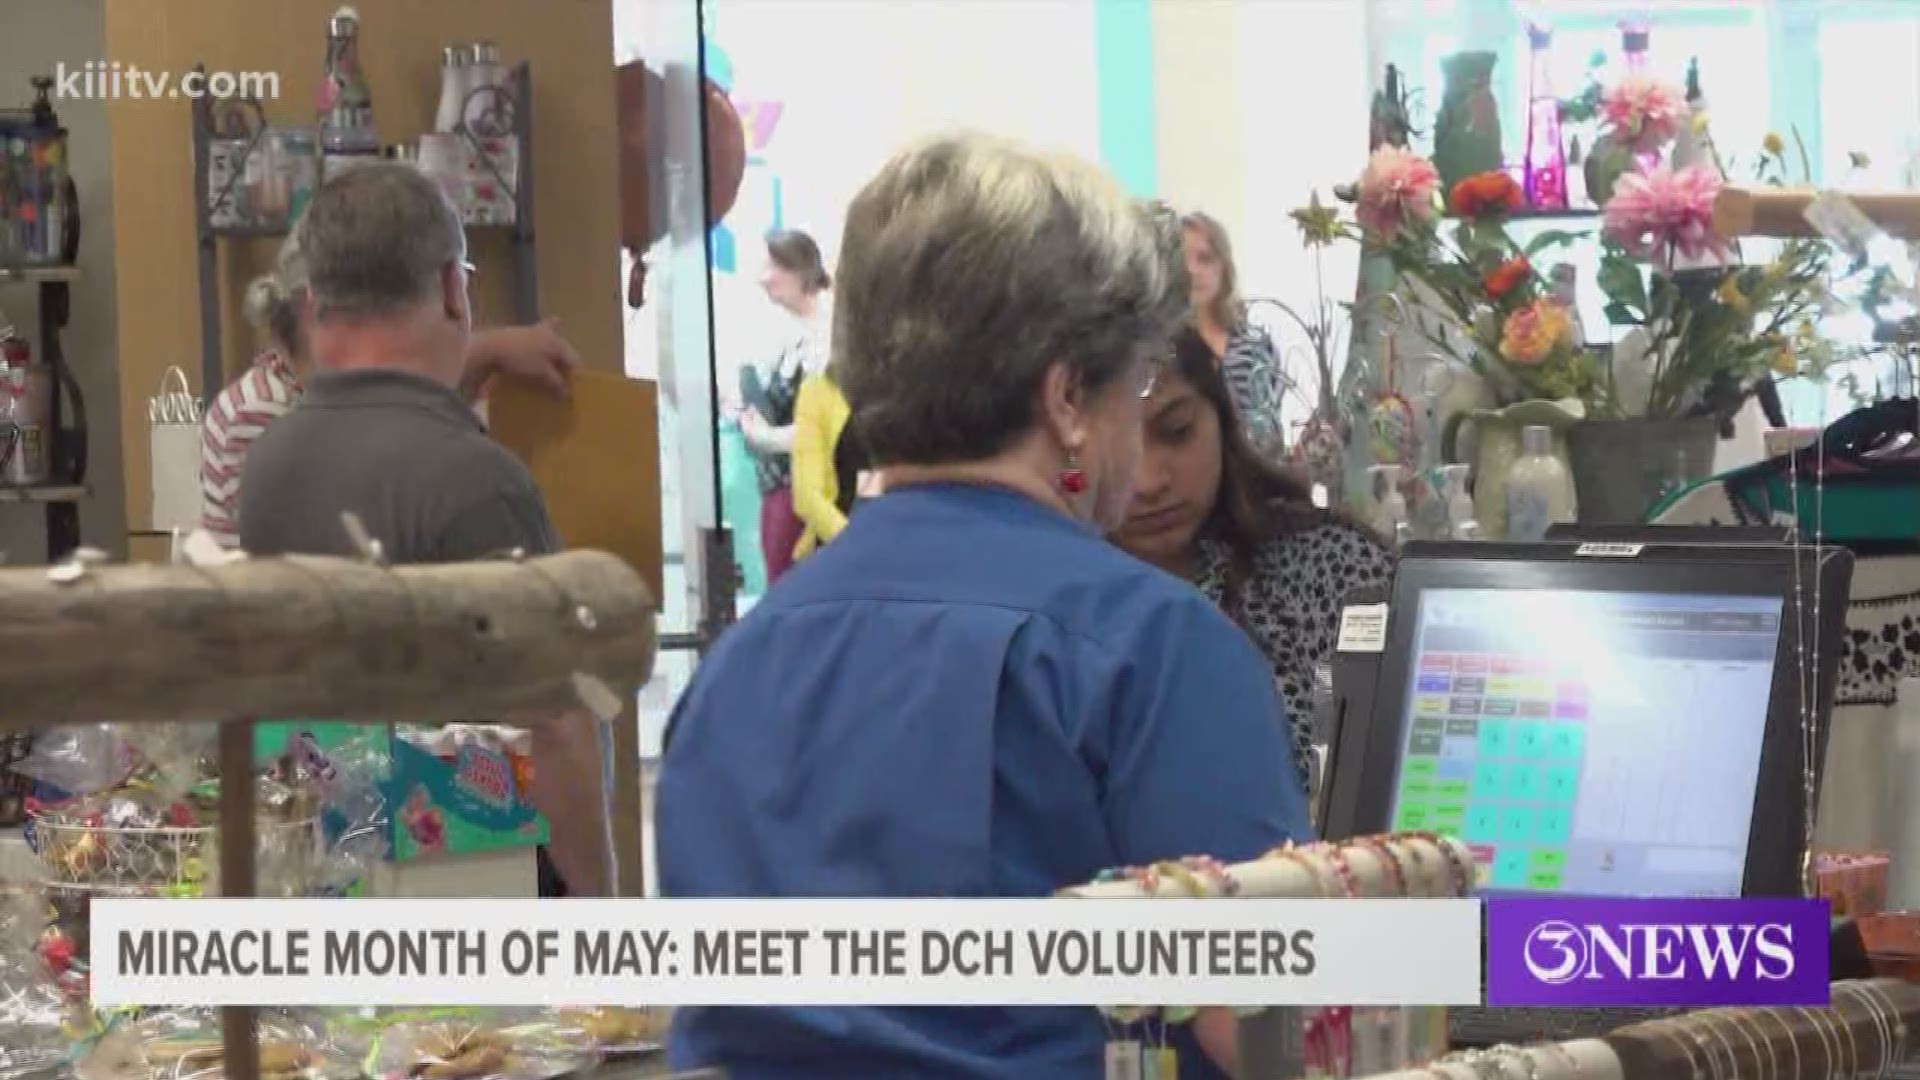 During the Miracle Month of May, 3News aims to show you the work that is being done at Driscoll Children's Hospital. Much of that work cannot be done without the help of volunteers who make a real difference.